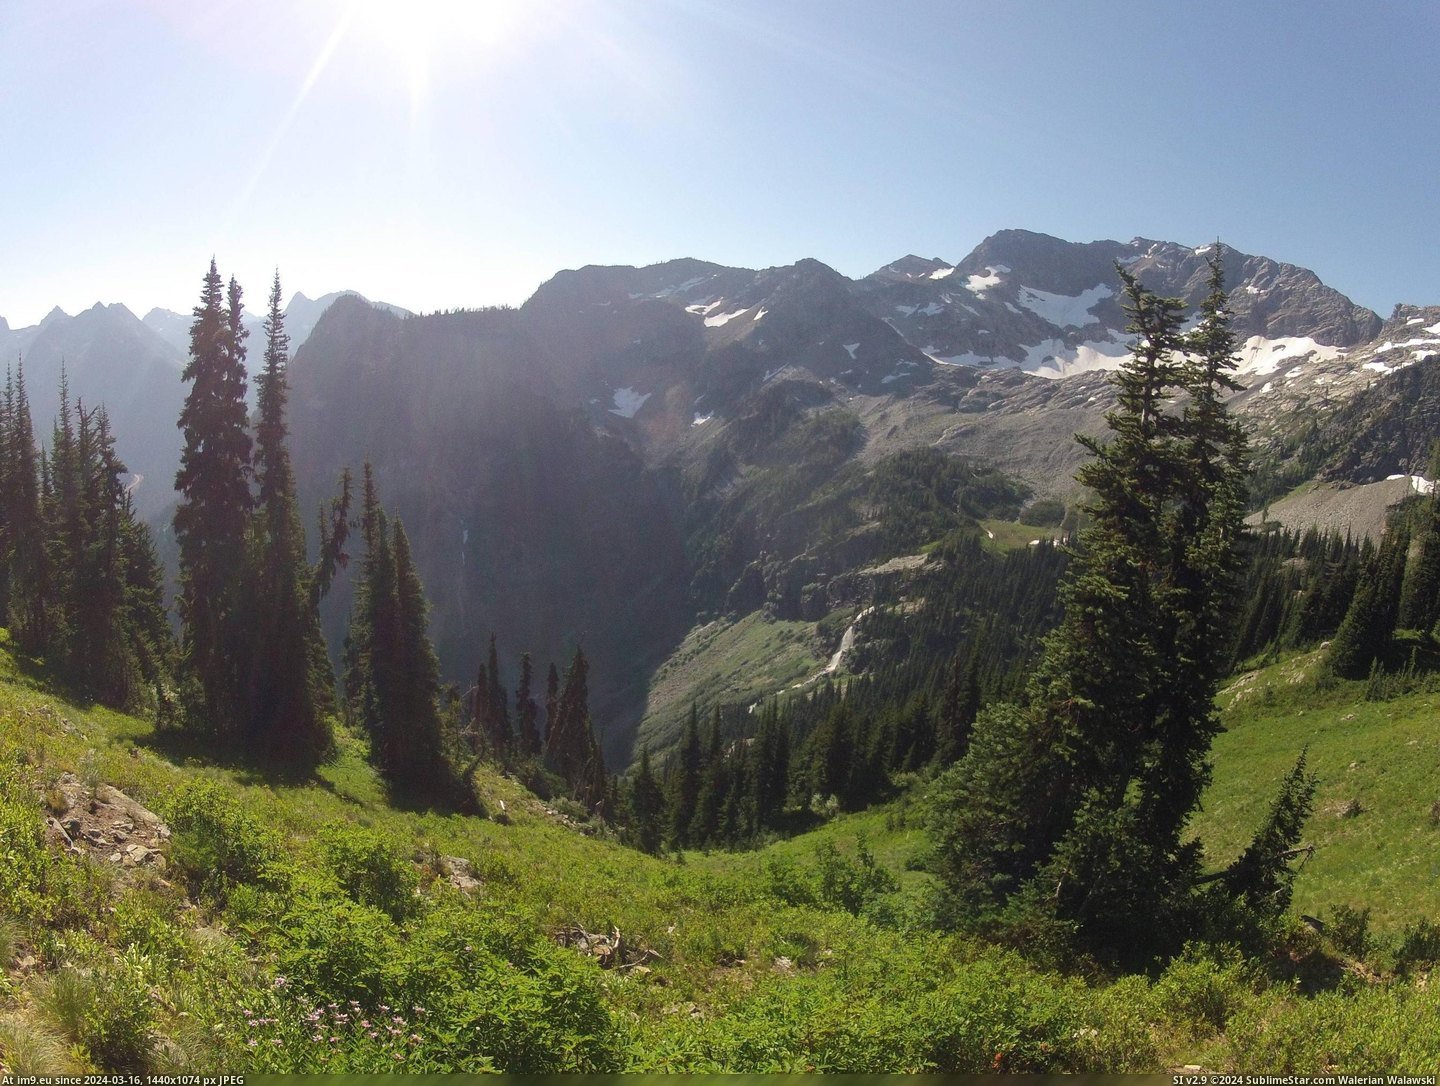 #National #Forest #3840x2880 #Wenatchee #Okanogan #North #Cascades [Earthporn] North Cascades, Okanogan-Wenatchee National Forest [3840x2880] [OC] Pic. (Image of album My r/EARTHPORN favs))